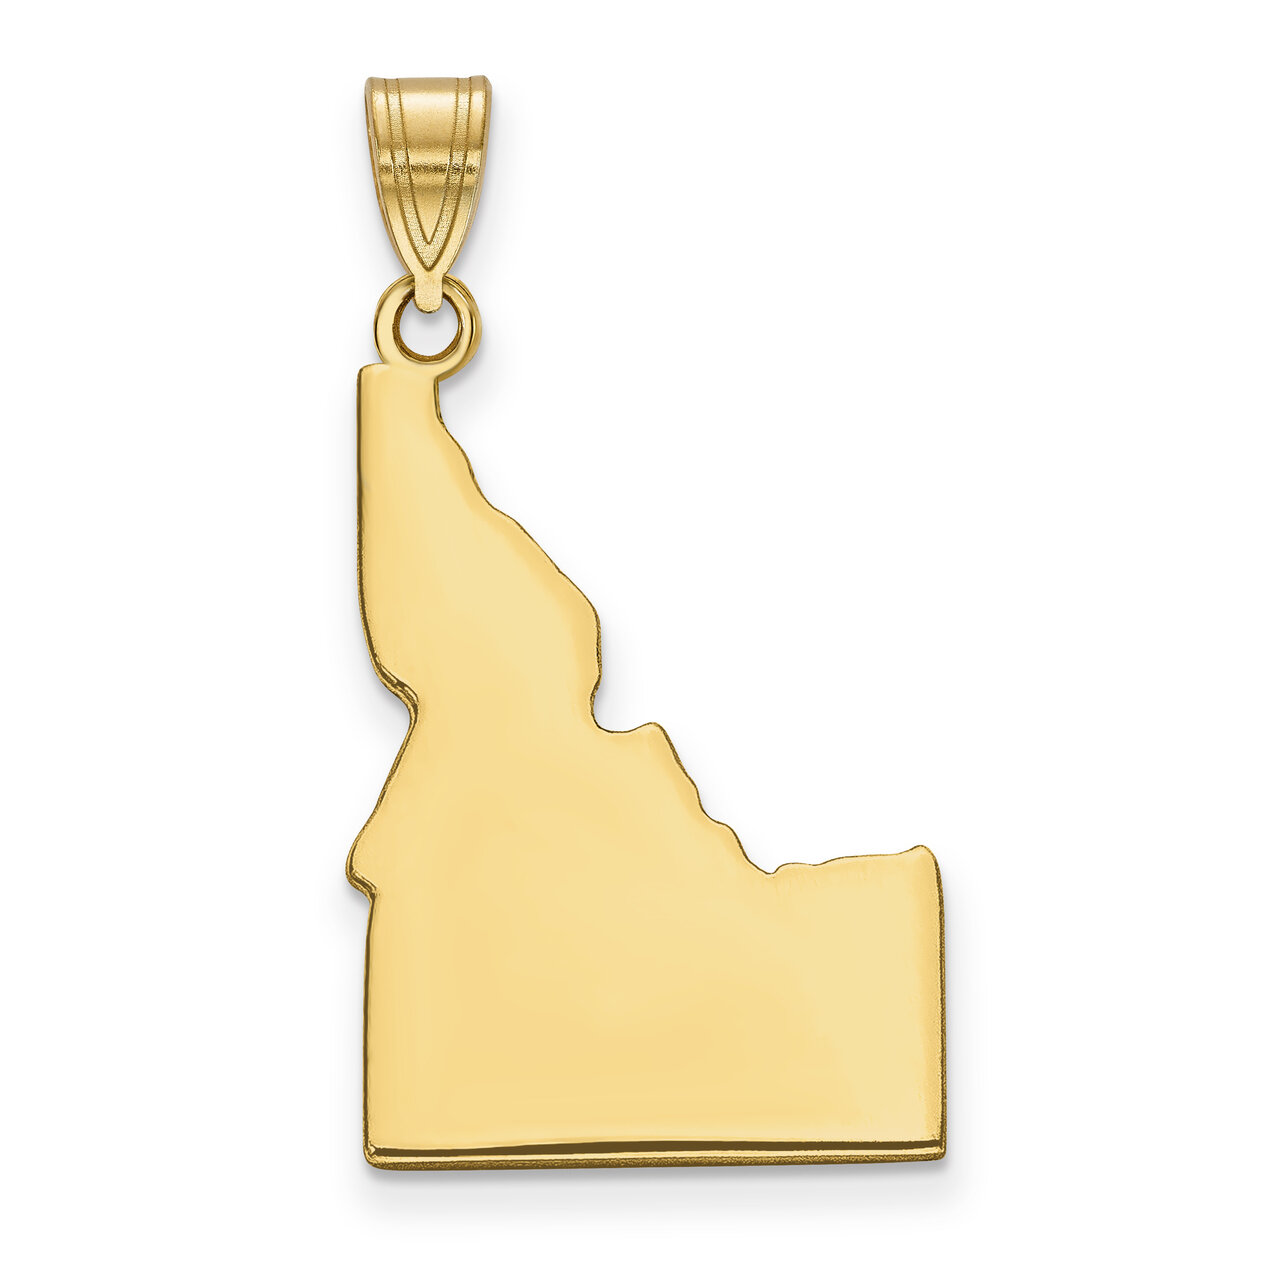 Idaho State Pendant Charm Gold-plated on Silver Engravable XNA707GP-ID